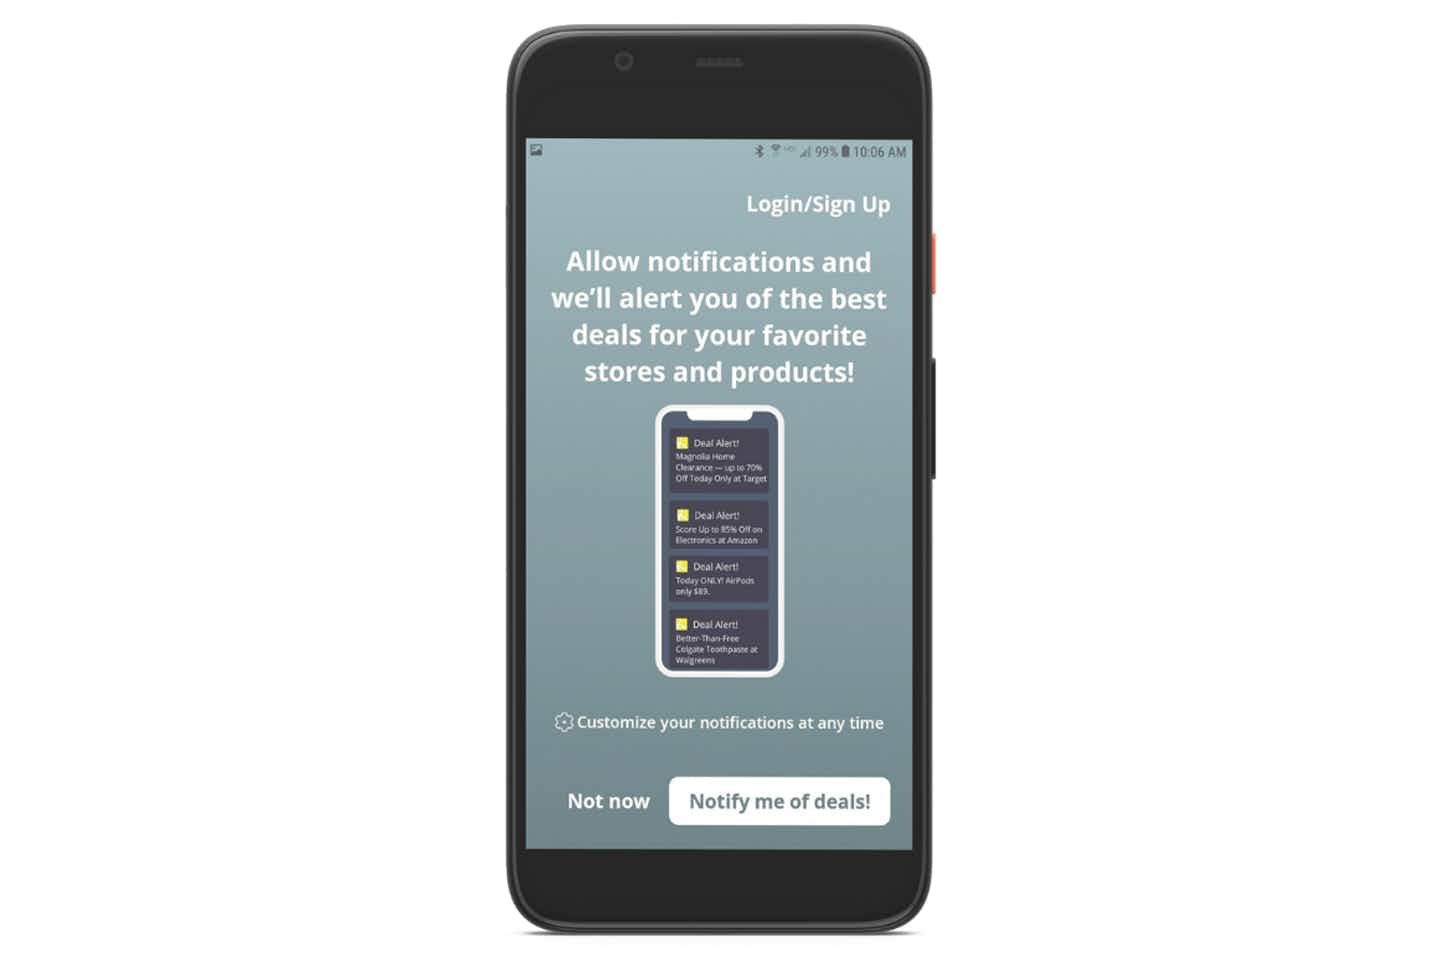 screenshot of Android app showing deal notification settings